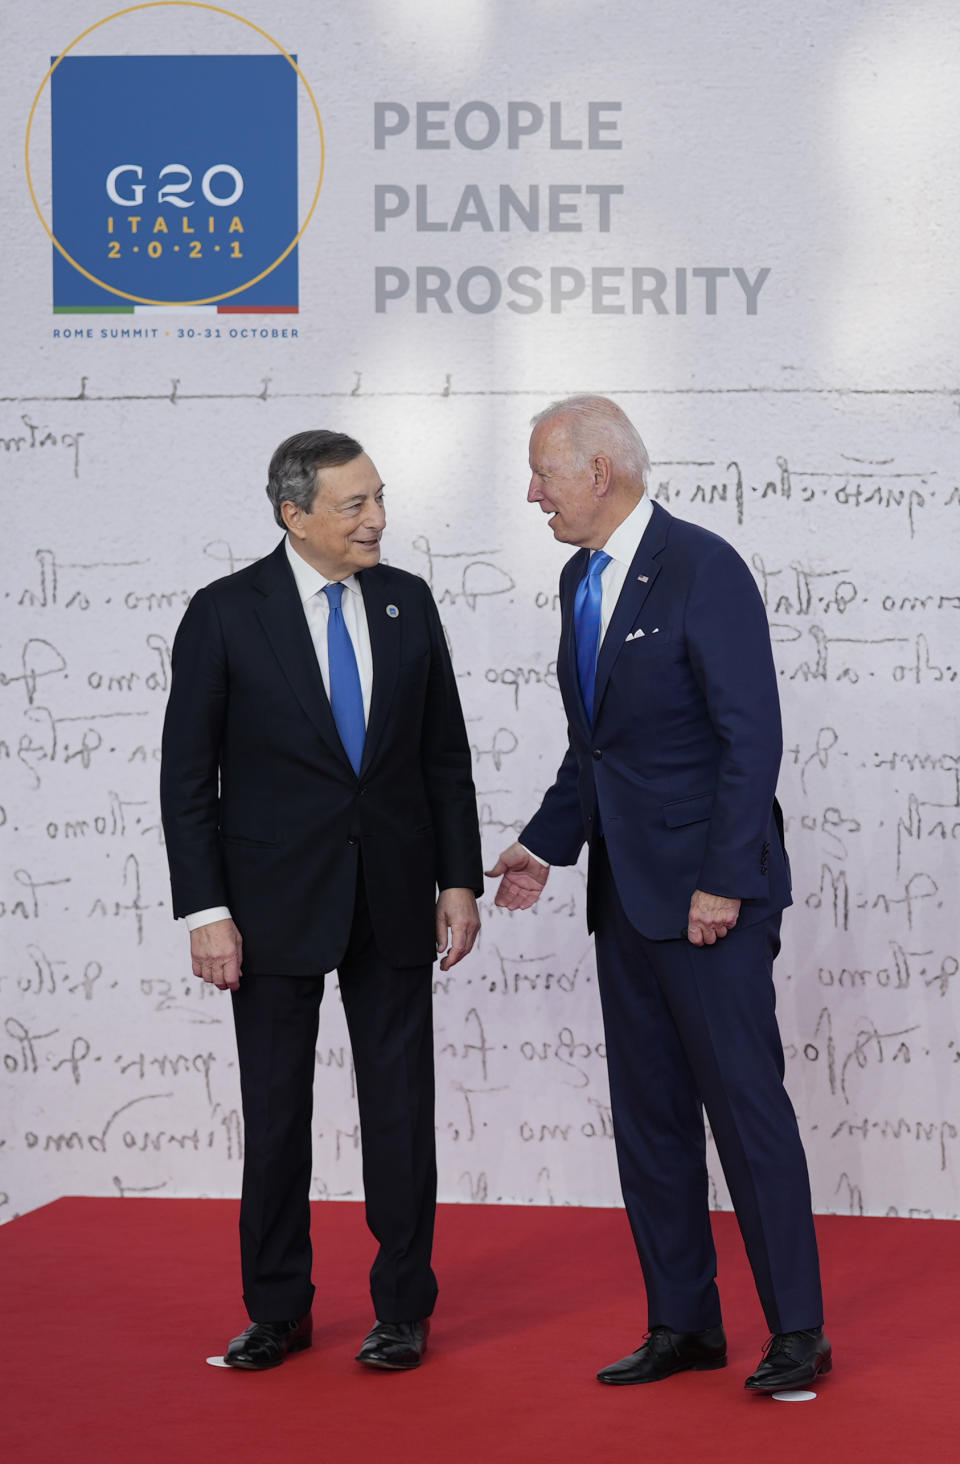 U.S. President Joe Biden, right, speaks with Italy's Prime Minister Mario Draghi as he arrives at the La Nuvola conference center for the G20 summit in Rome, Saturday, Oct. 30, 2021. The two-day Group of 20 summit is the first in-person gathering of leaders of the world's biggest economies since the COVID-19 pandemic started. (AP Photo/Domenico Stinellis)